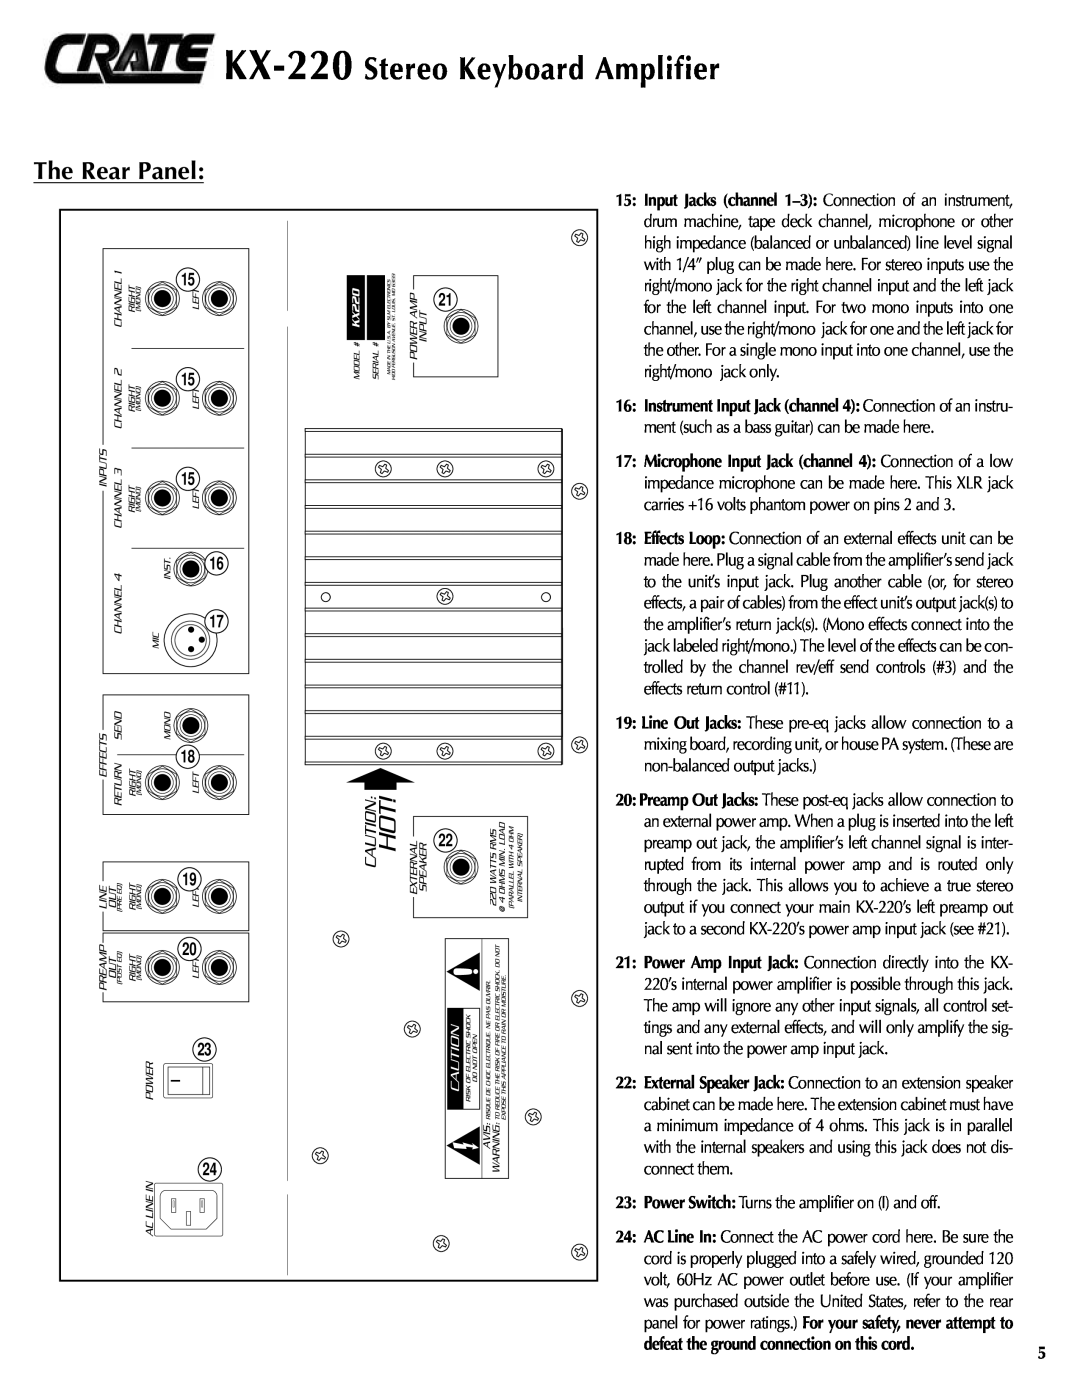 Crate Amplifiers manual The Rear Panel, KX-220 Stereo Keyboard Amplifier, defeat the ground connection on this cord 